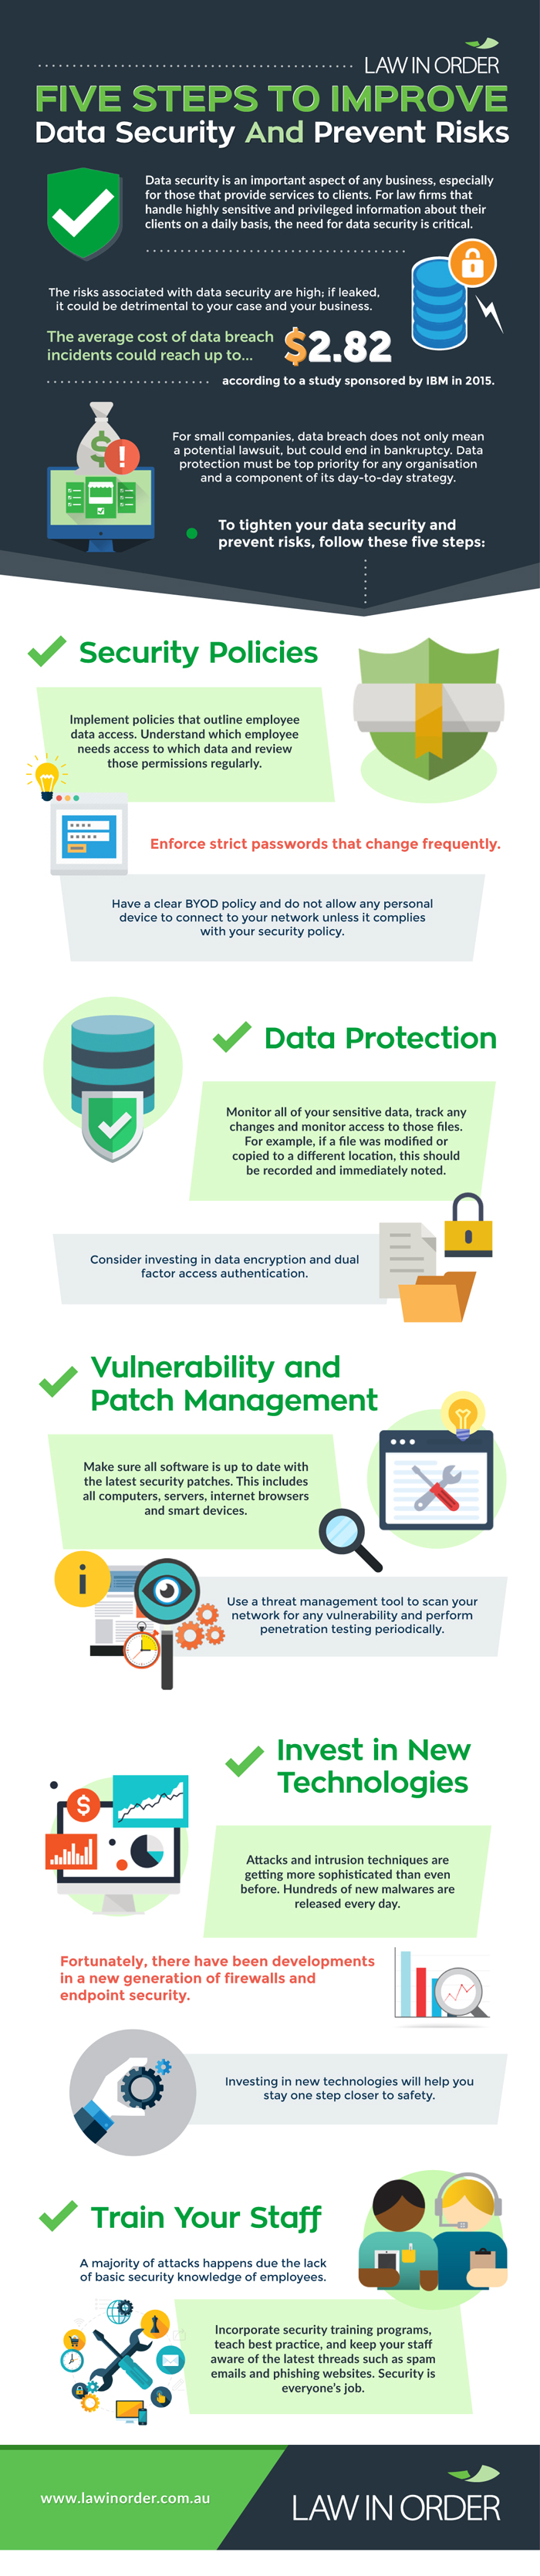 Five-Steps-To-Improve-Data-Security-And-Prevent-Risks.jpg-1